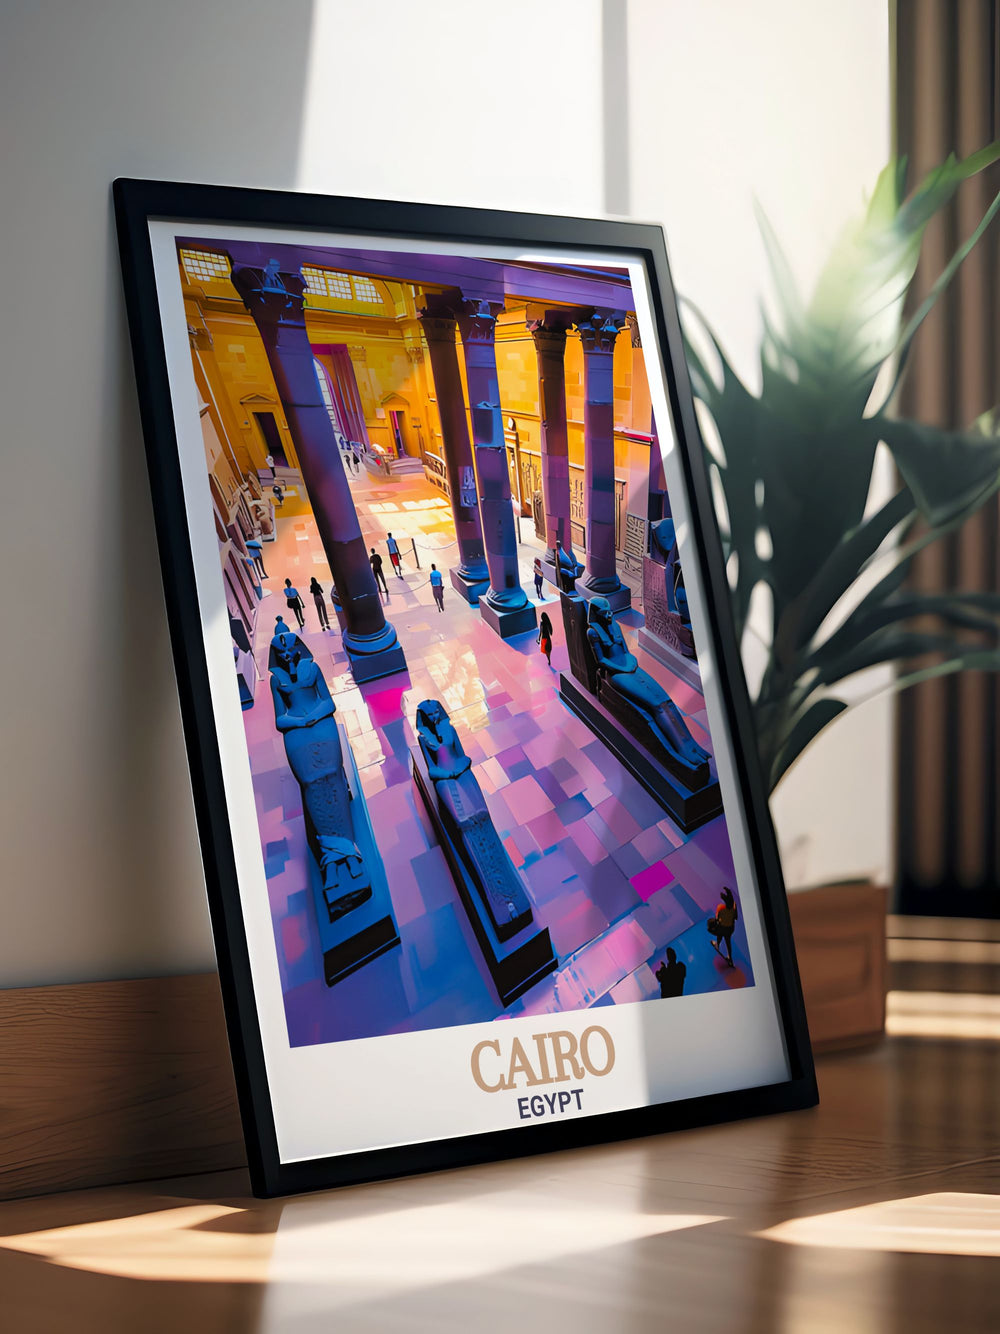 This beautiful Egyptian Museum poster showcases the architectural grandeur and historical significance of Cairo making it a great addition to any art collection and a thoughtful personalized gift.